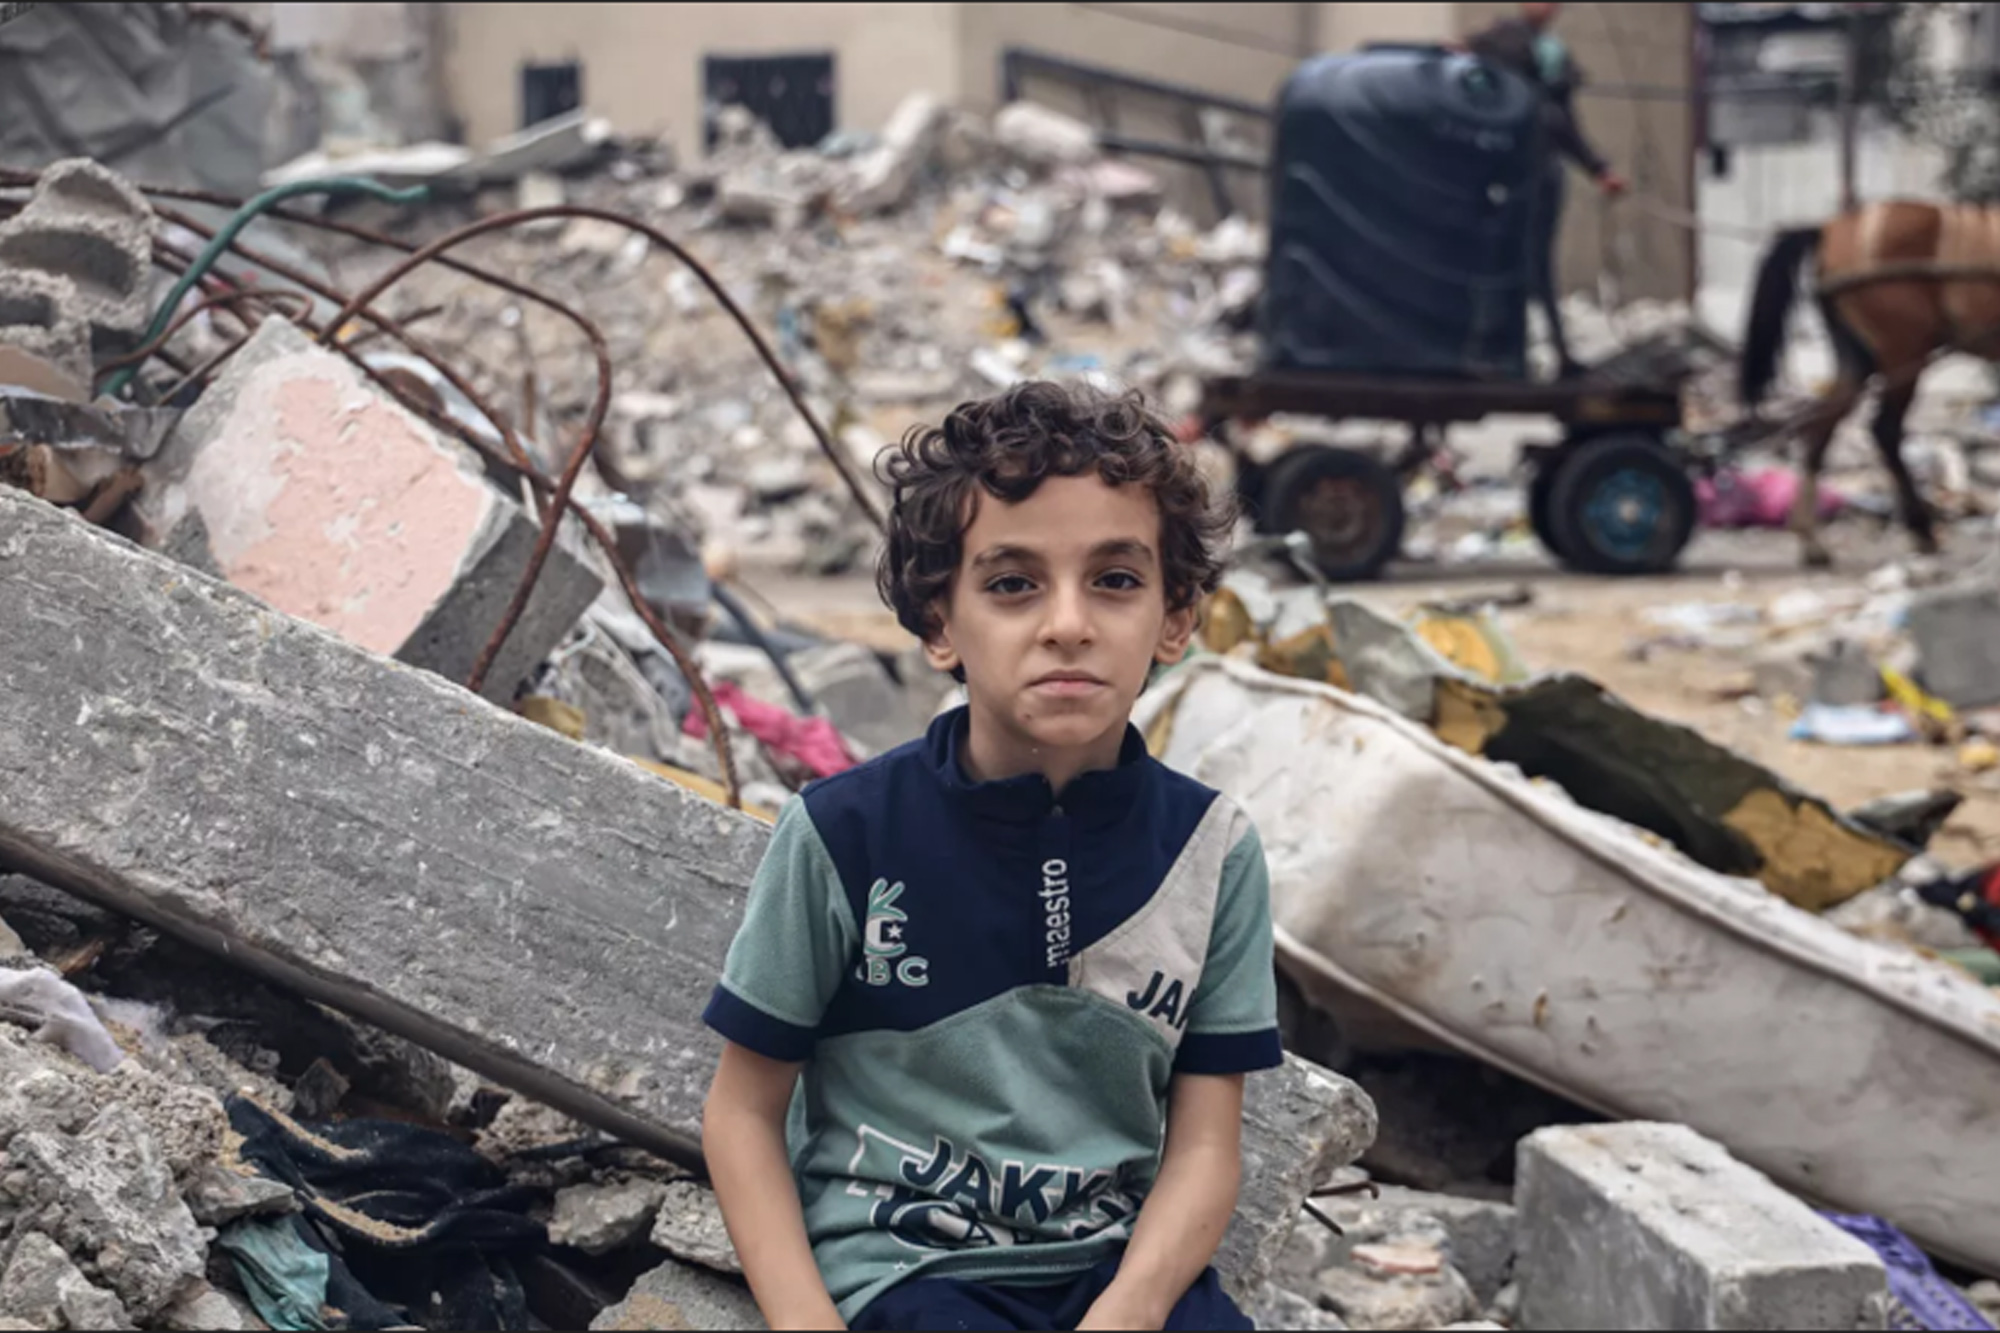 An 8-year-old Palestinian boy sits in the rubble of destroyed buildings in the Gaza Strip.